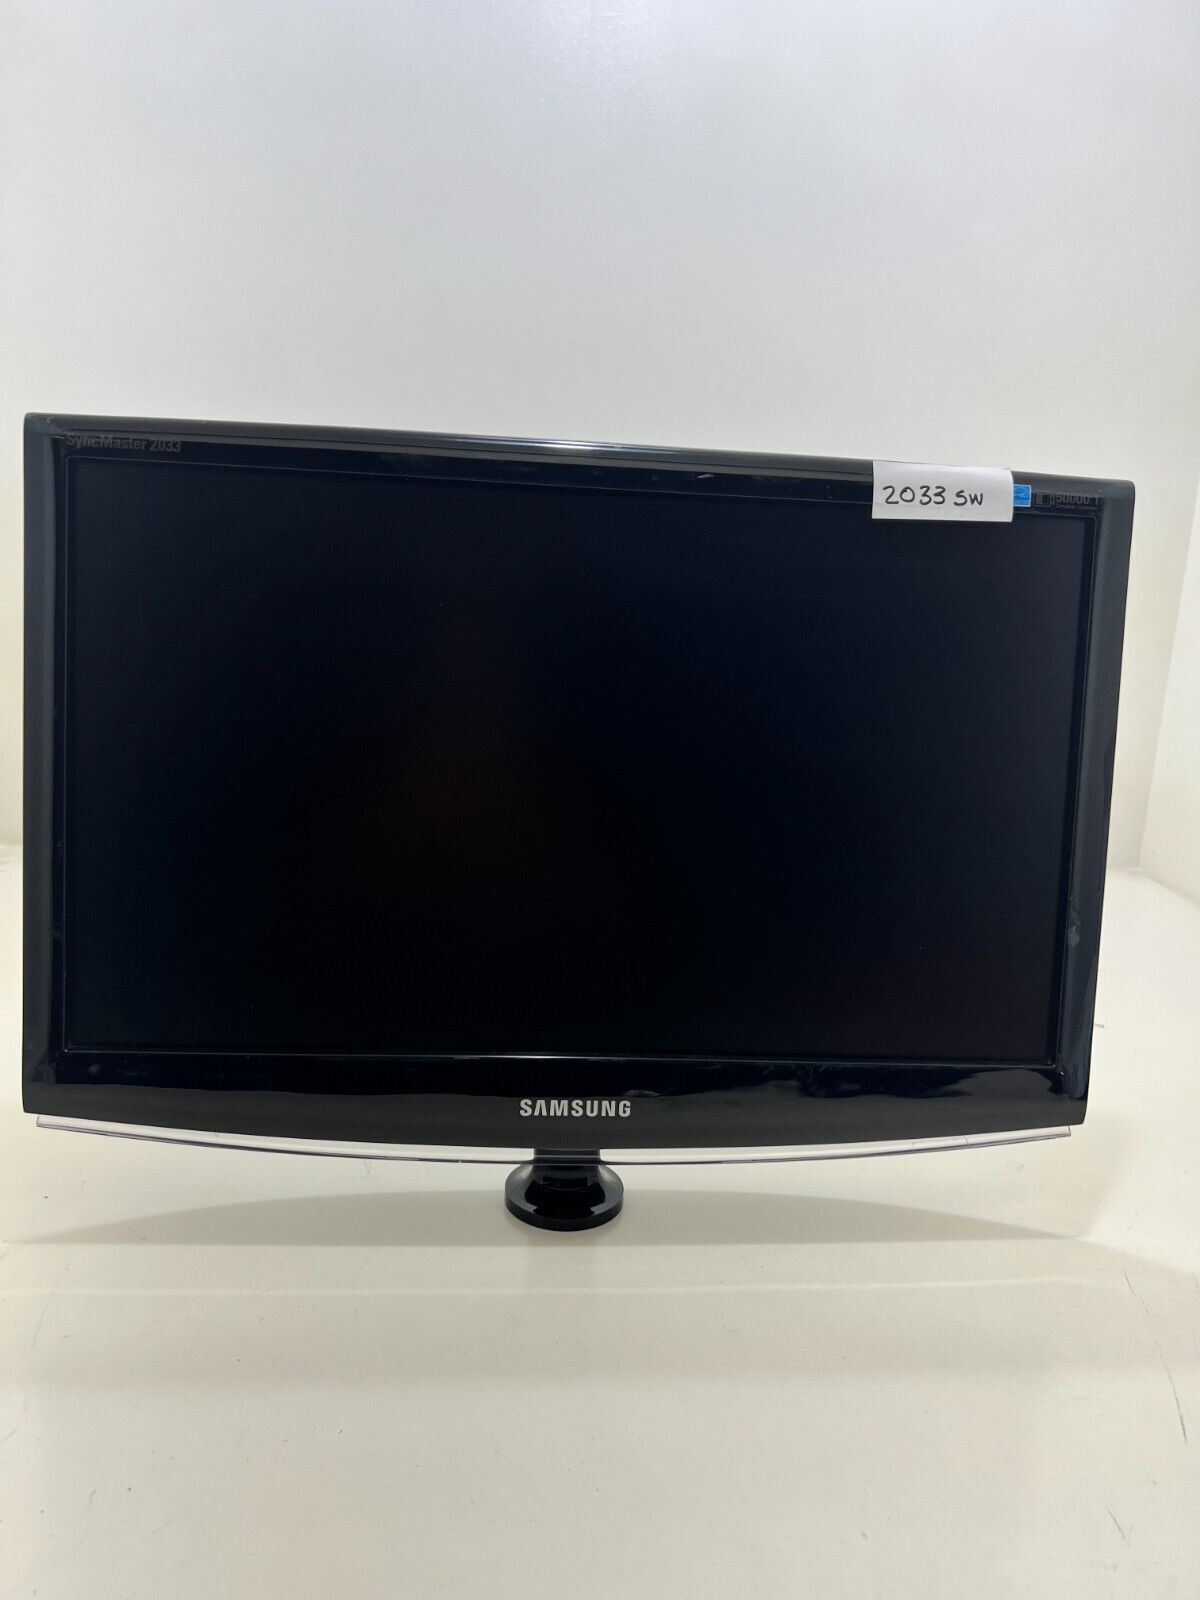 Samsung 2033sw 20in. LCD Monitor (no stand)